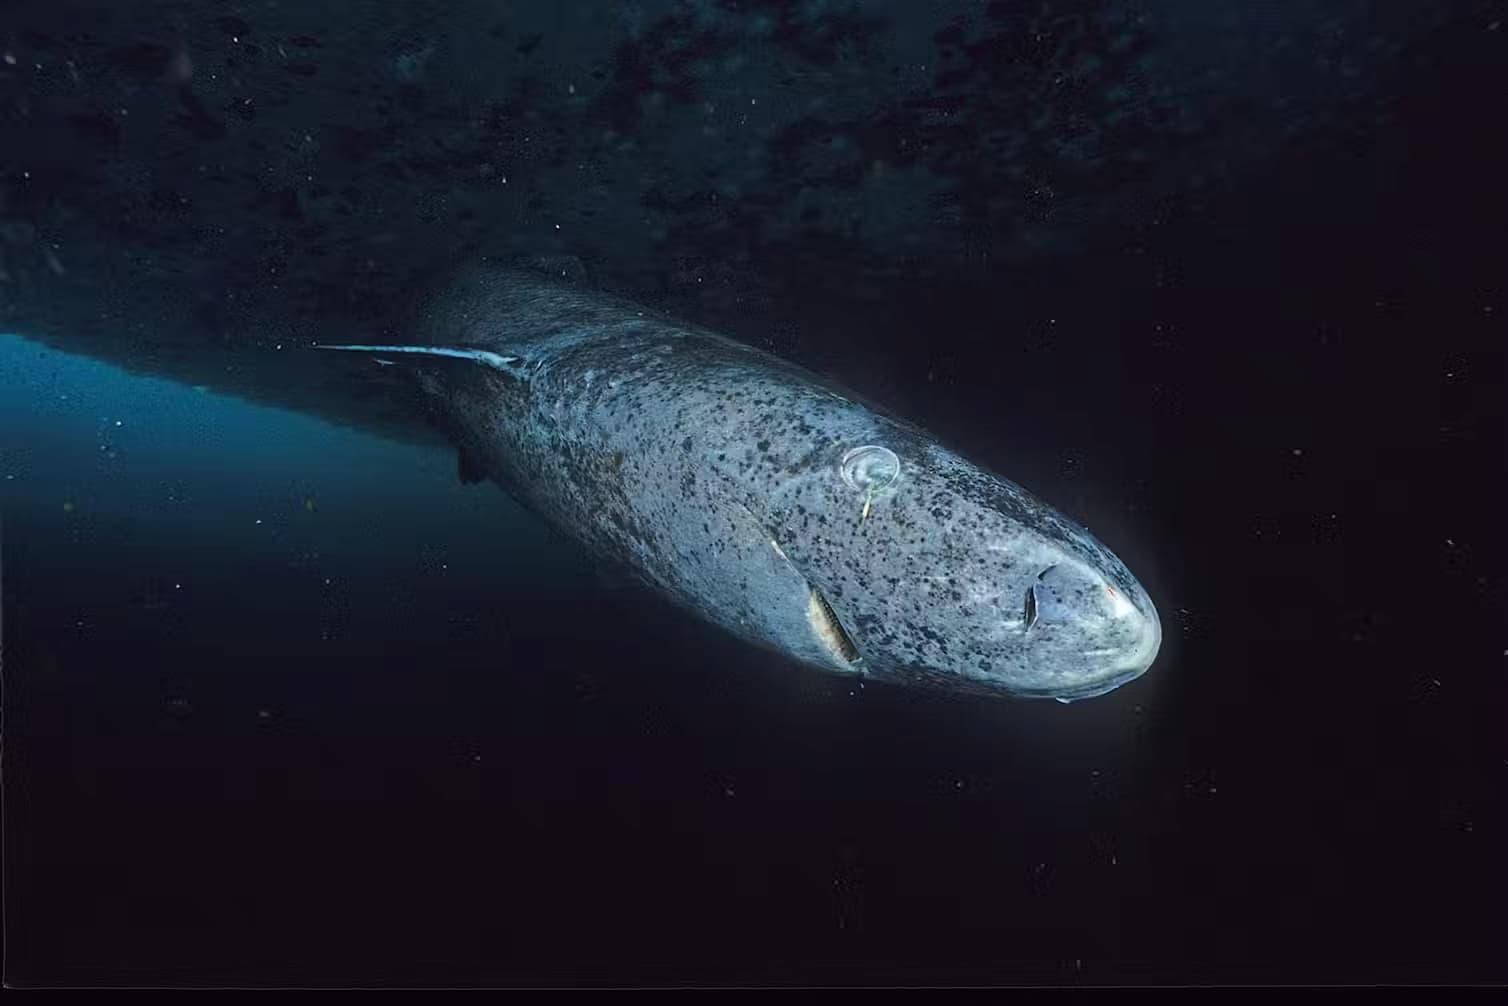 The Greenland shark can live up to 450 years. Wikimedia Comons/Hemming1952, CC BY-SA